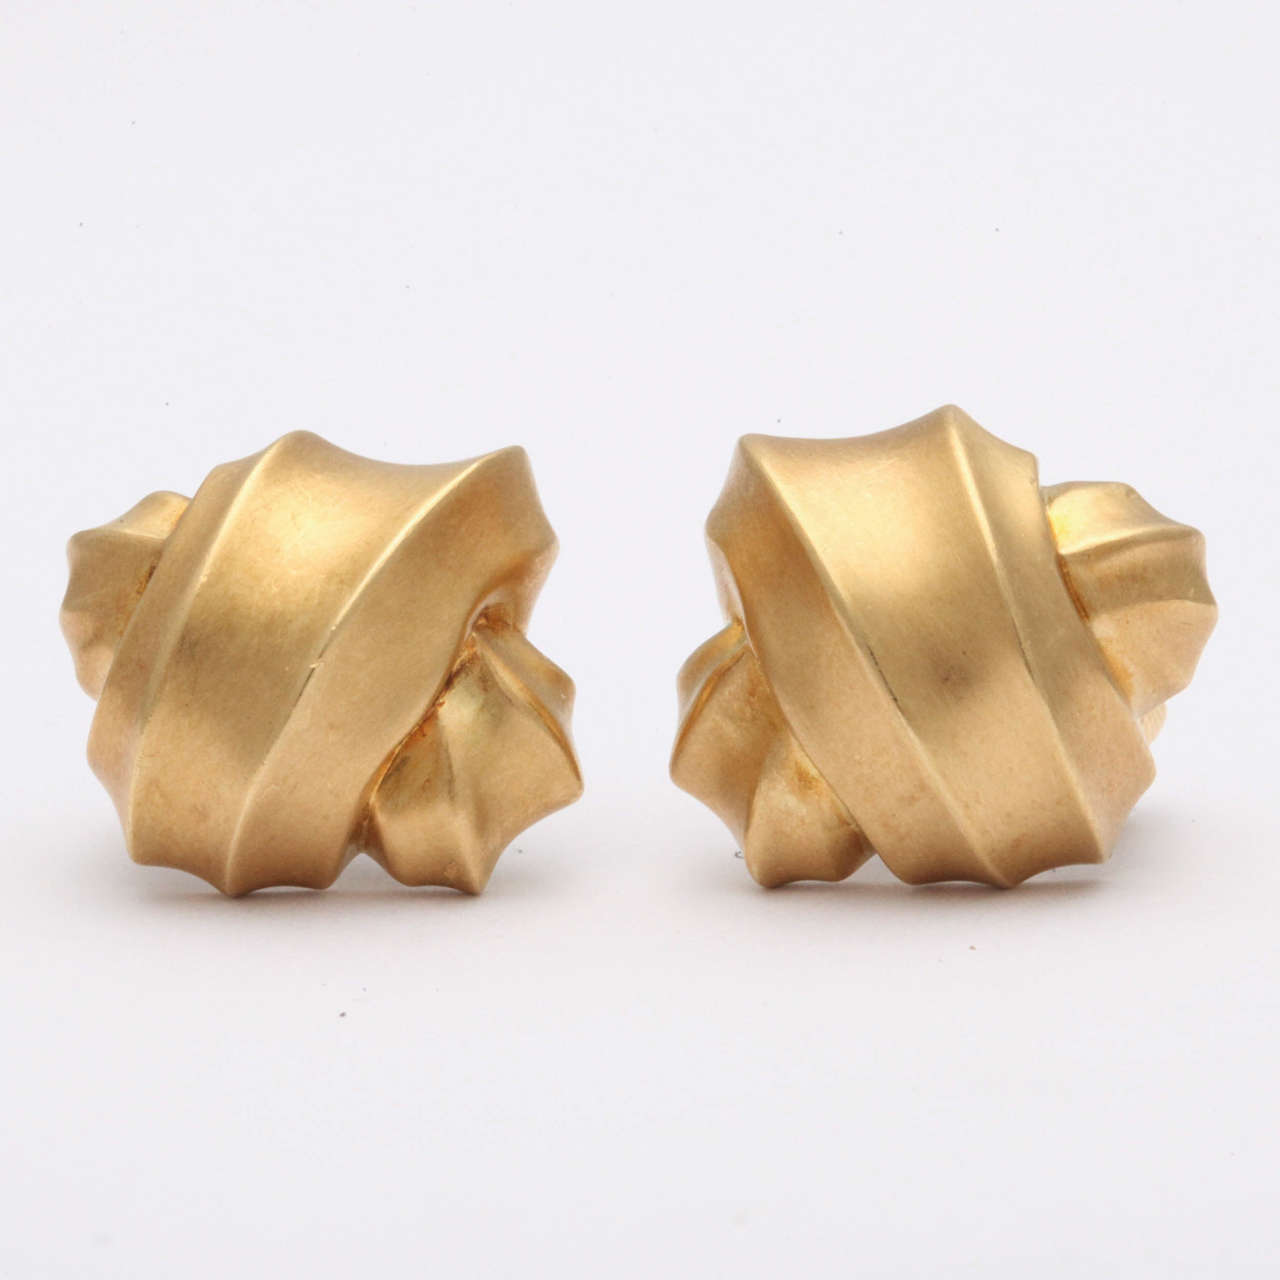 Cummings  heavy Cubist Clip on Earrings.  Very modernistic and ultra chic with a brushed Gold finish.